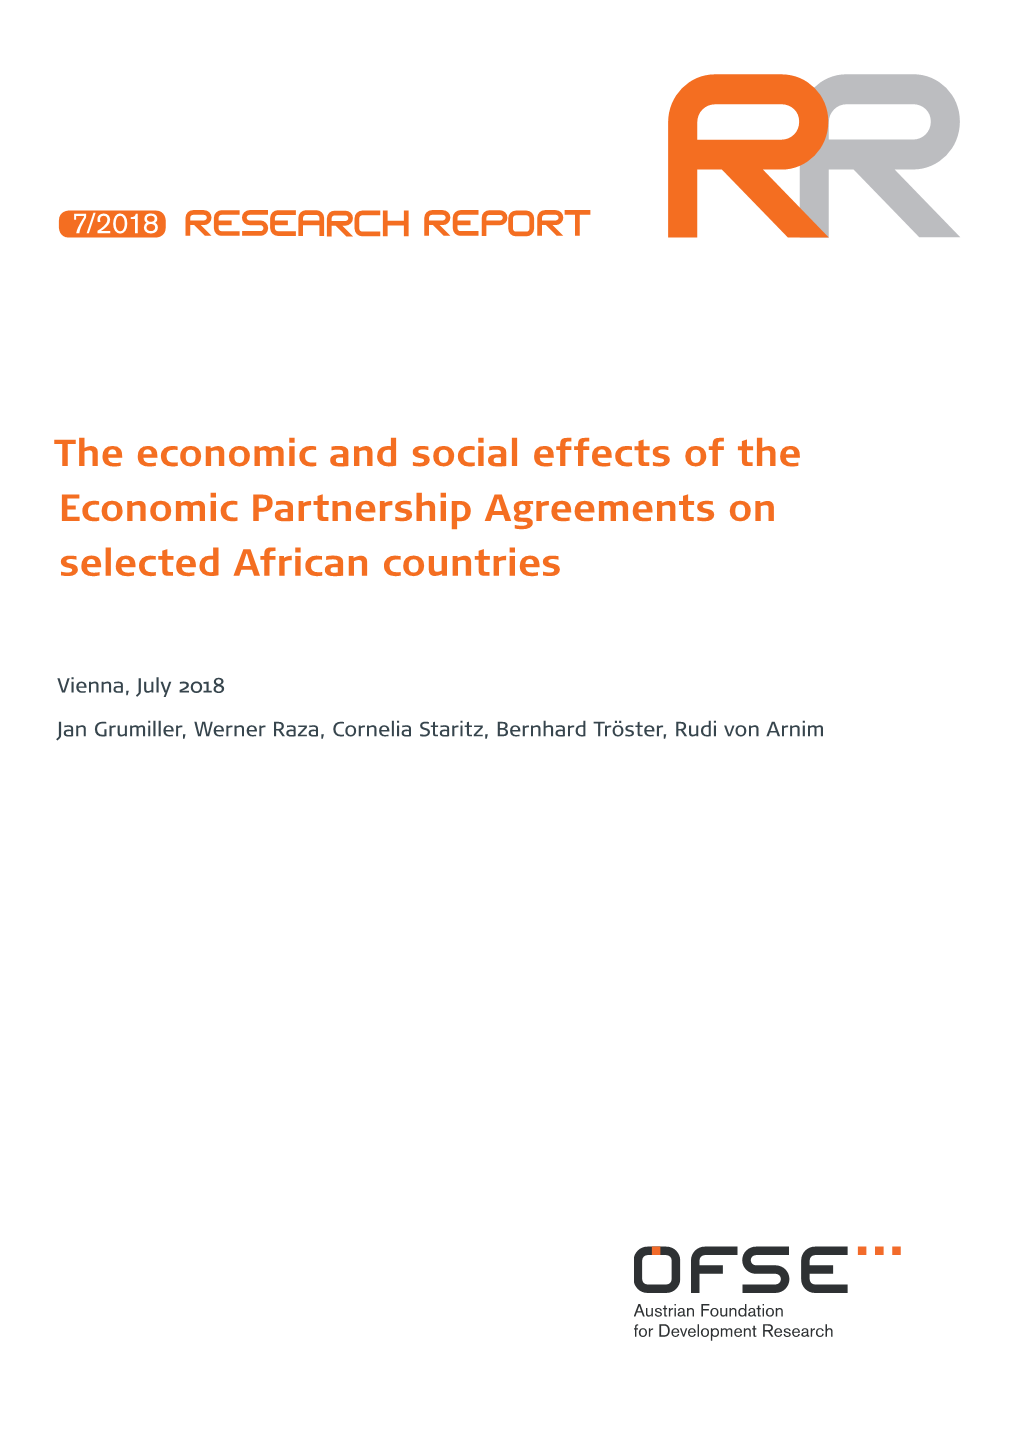 The Economic and Social Effects of the Economic Partnership Agreements on Selected African Countries